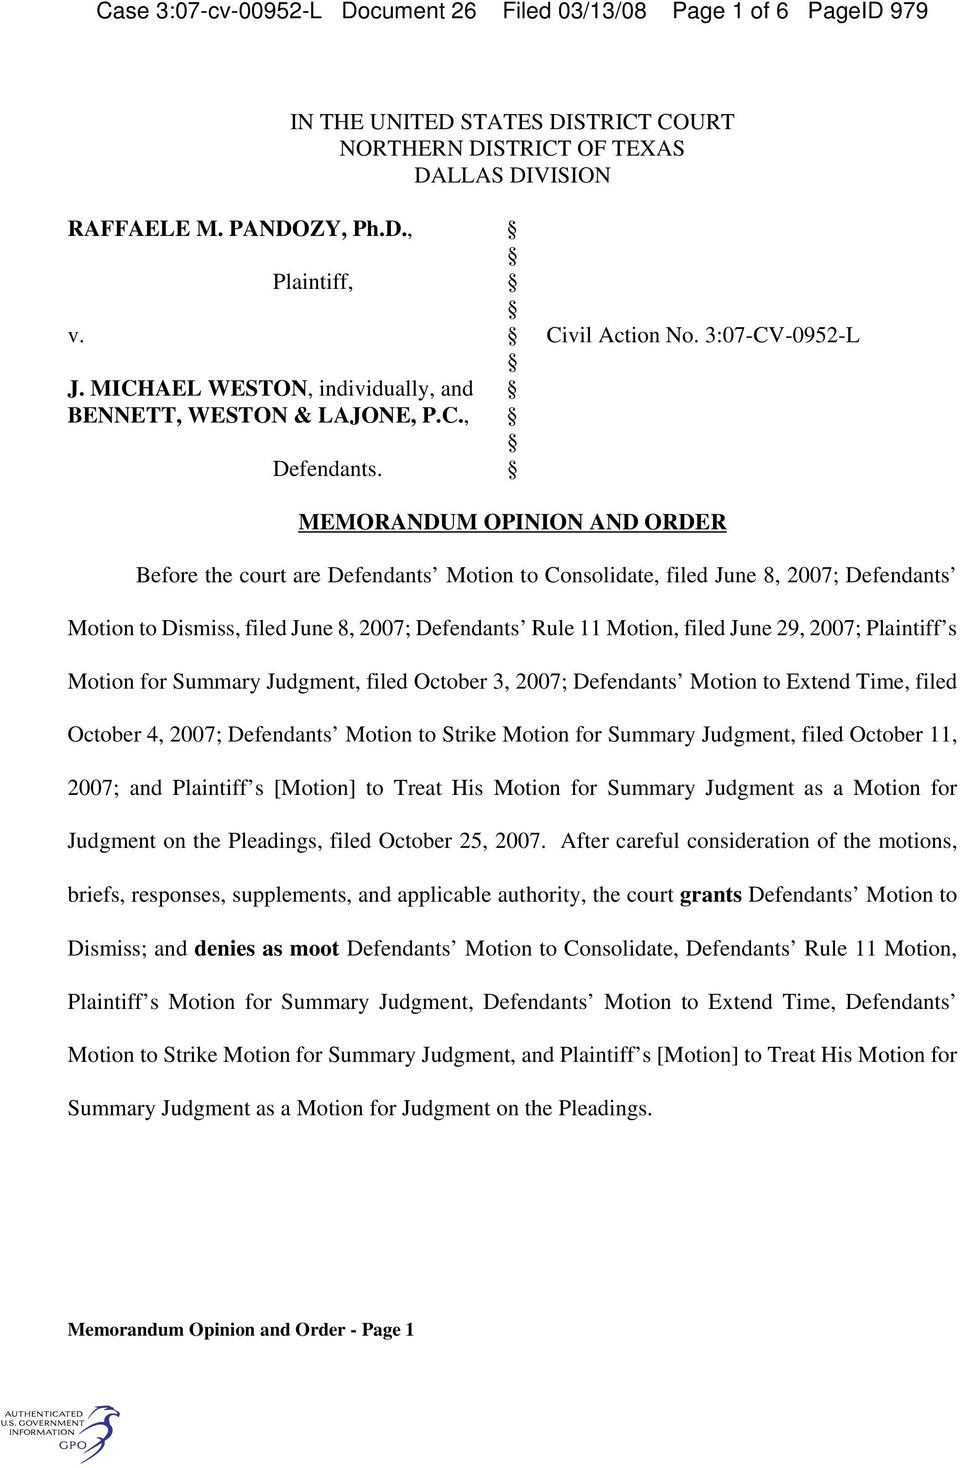 MEMORANDUM OPINION AND ORDER Before the court are Defendants Motion to Consolidate, filed June 8, 2007; Defendants Motion to Dismiss, filed June 8, 2007; Defendants Rule 11 Motion, filed June 29,